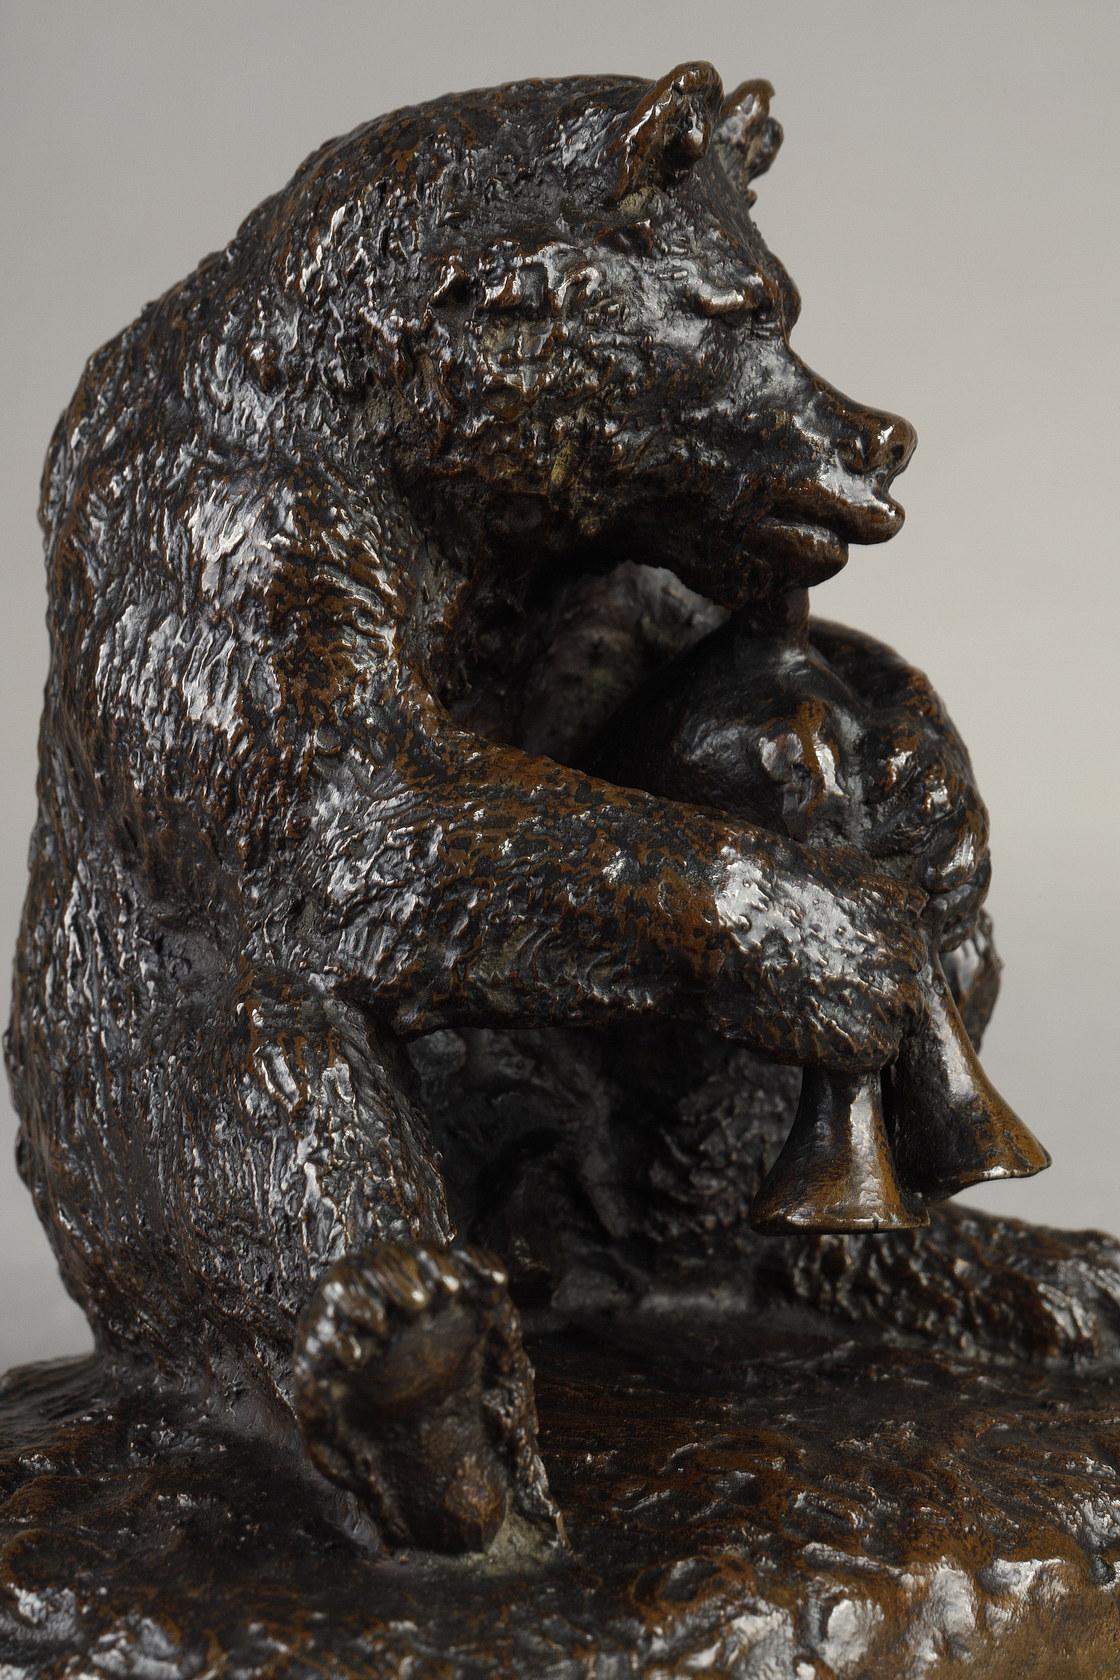 Bear Bagpiper
by Christophe FRATIN (1801-1864)

Bronze with nuanced dark brown patina
Signed on the base 